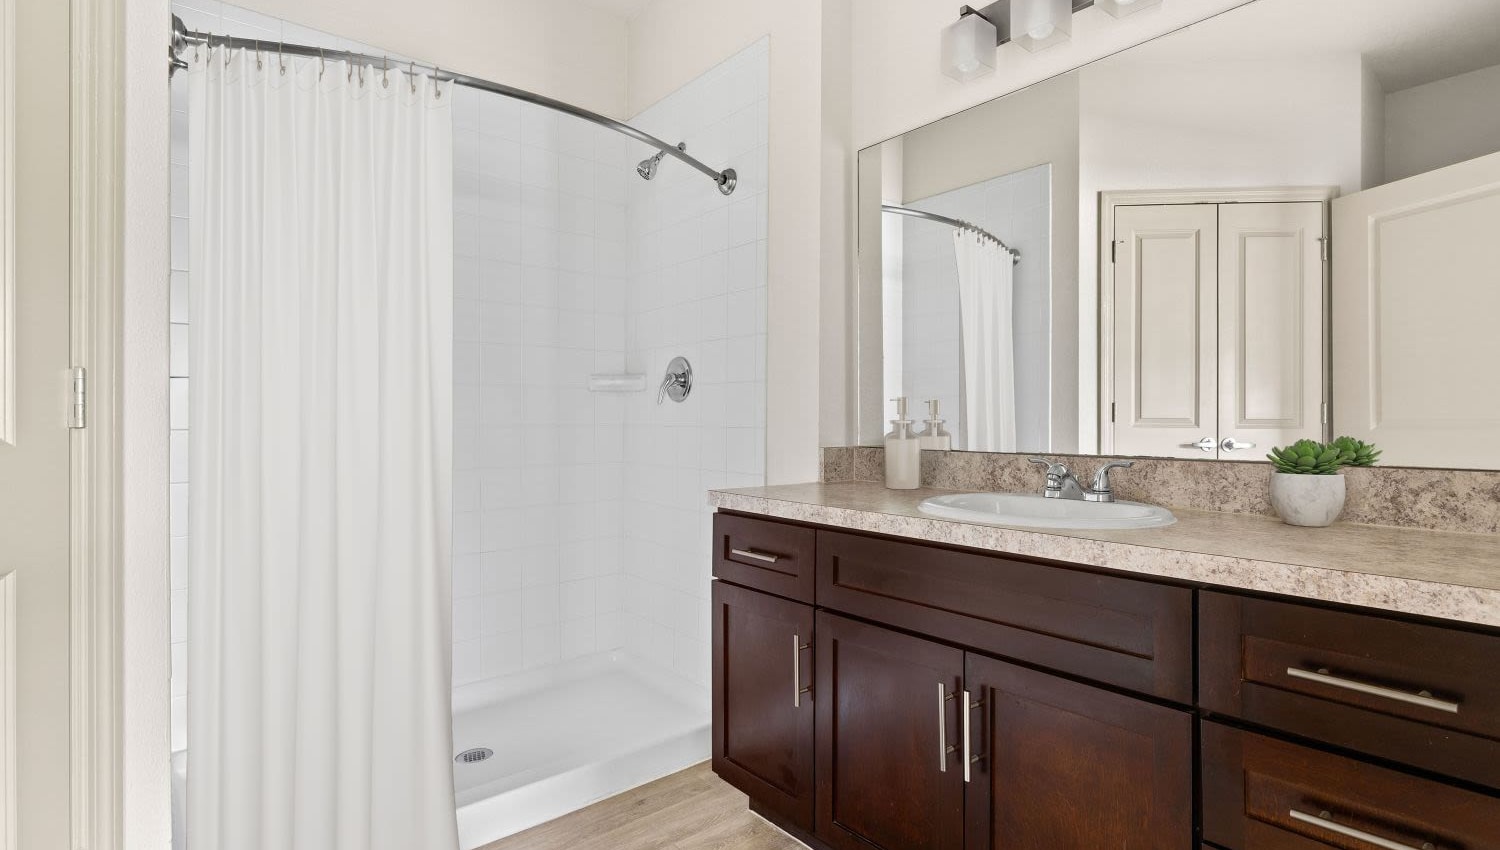 Personal bathroom and sink with bath tub at Lakeline at Bartram Park in Jacksonville, Florida